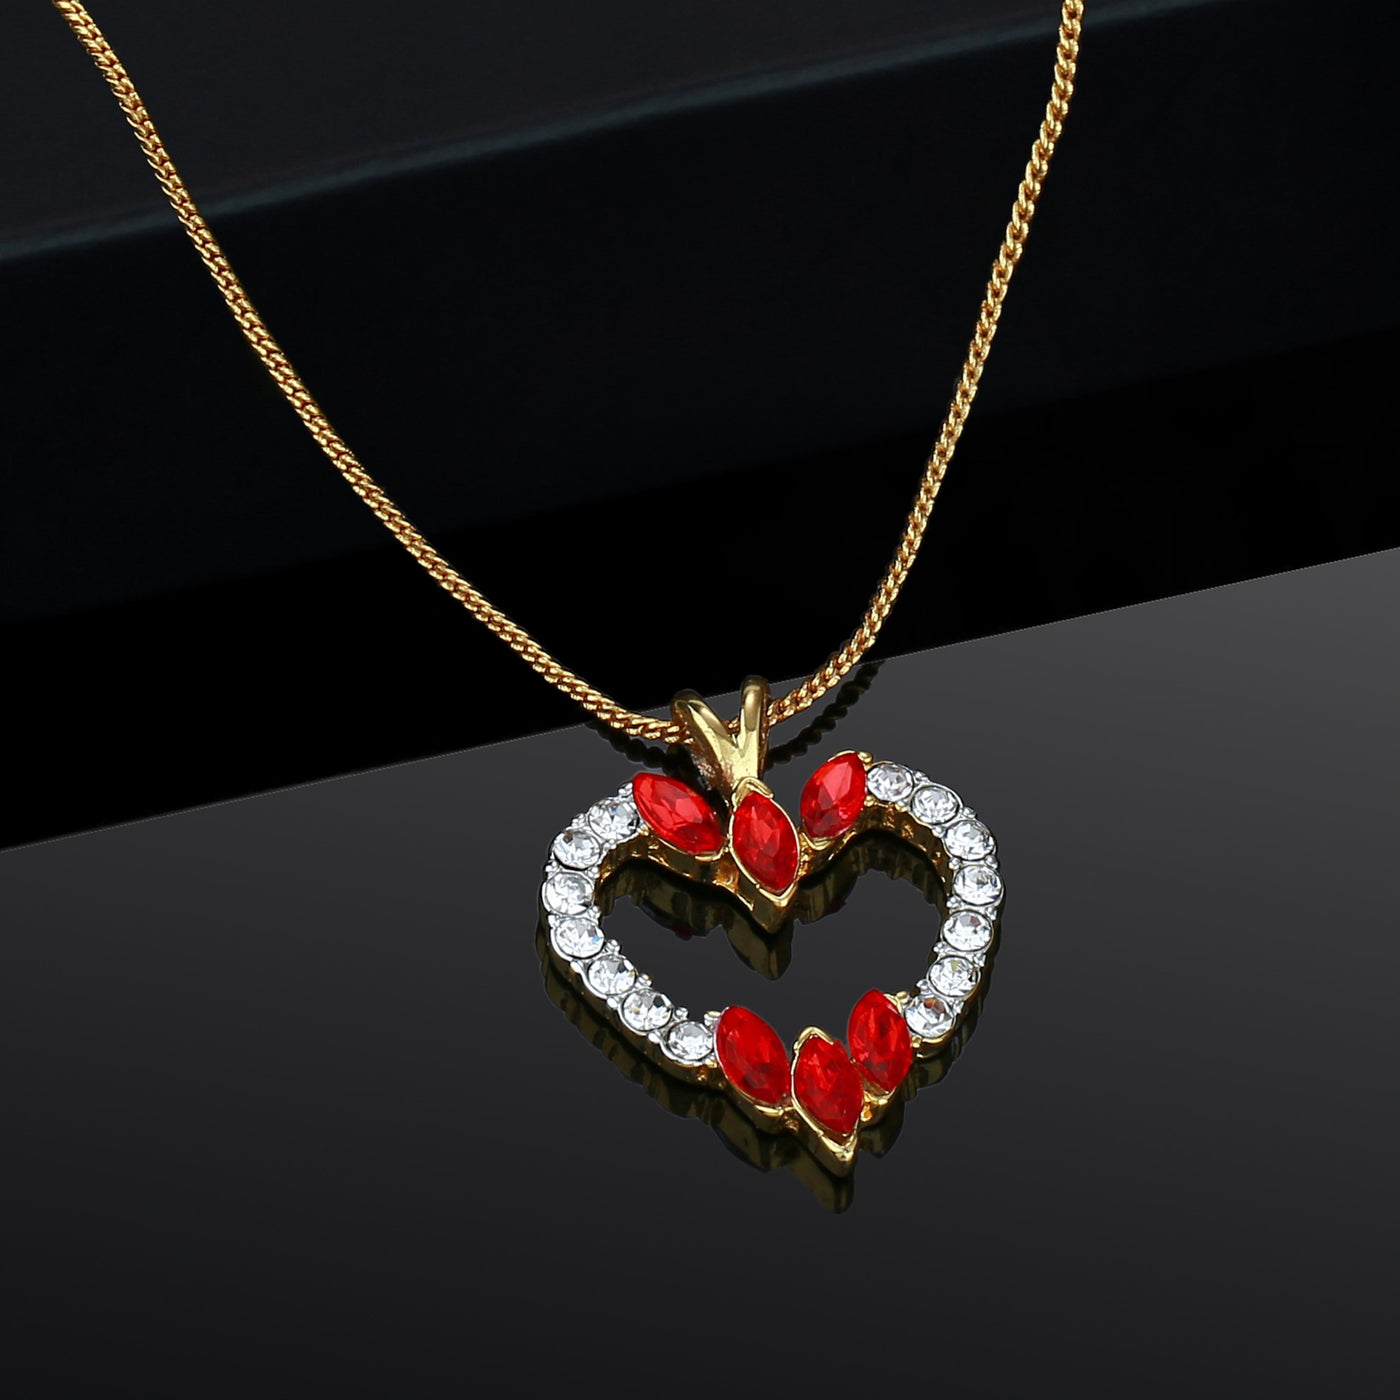 Estele Gold Plated Heart Shaped Pendant with Crystals for women